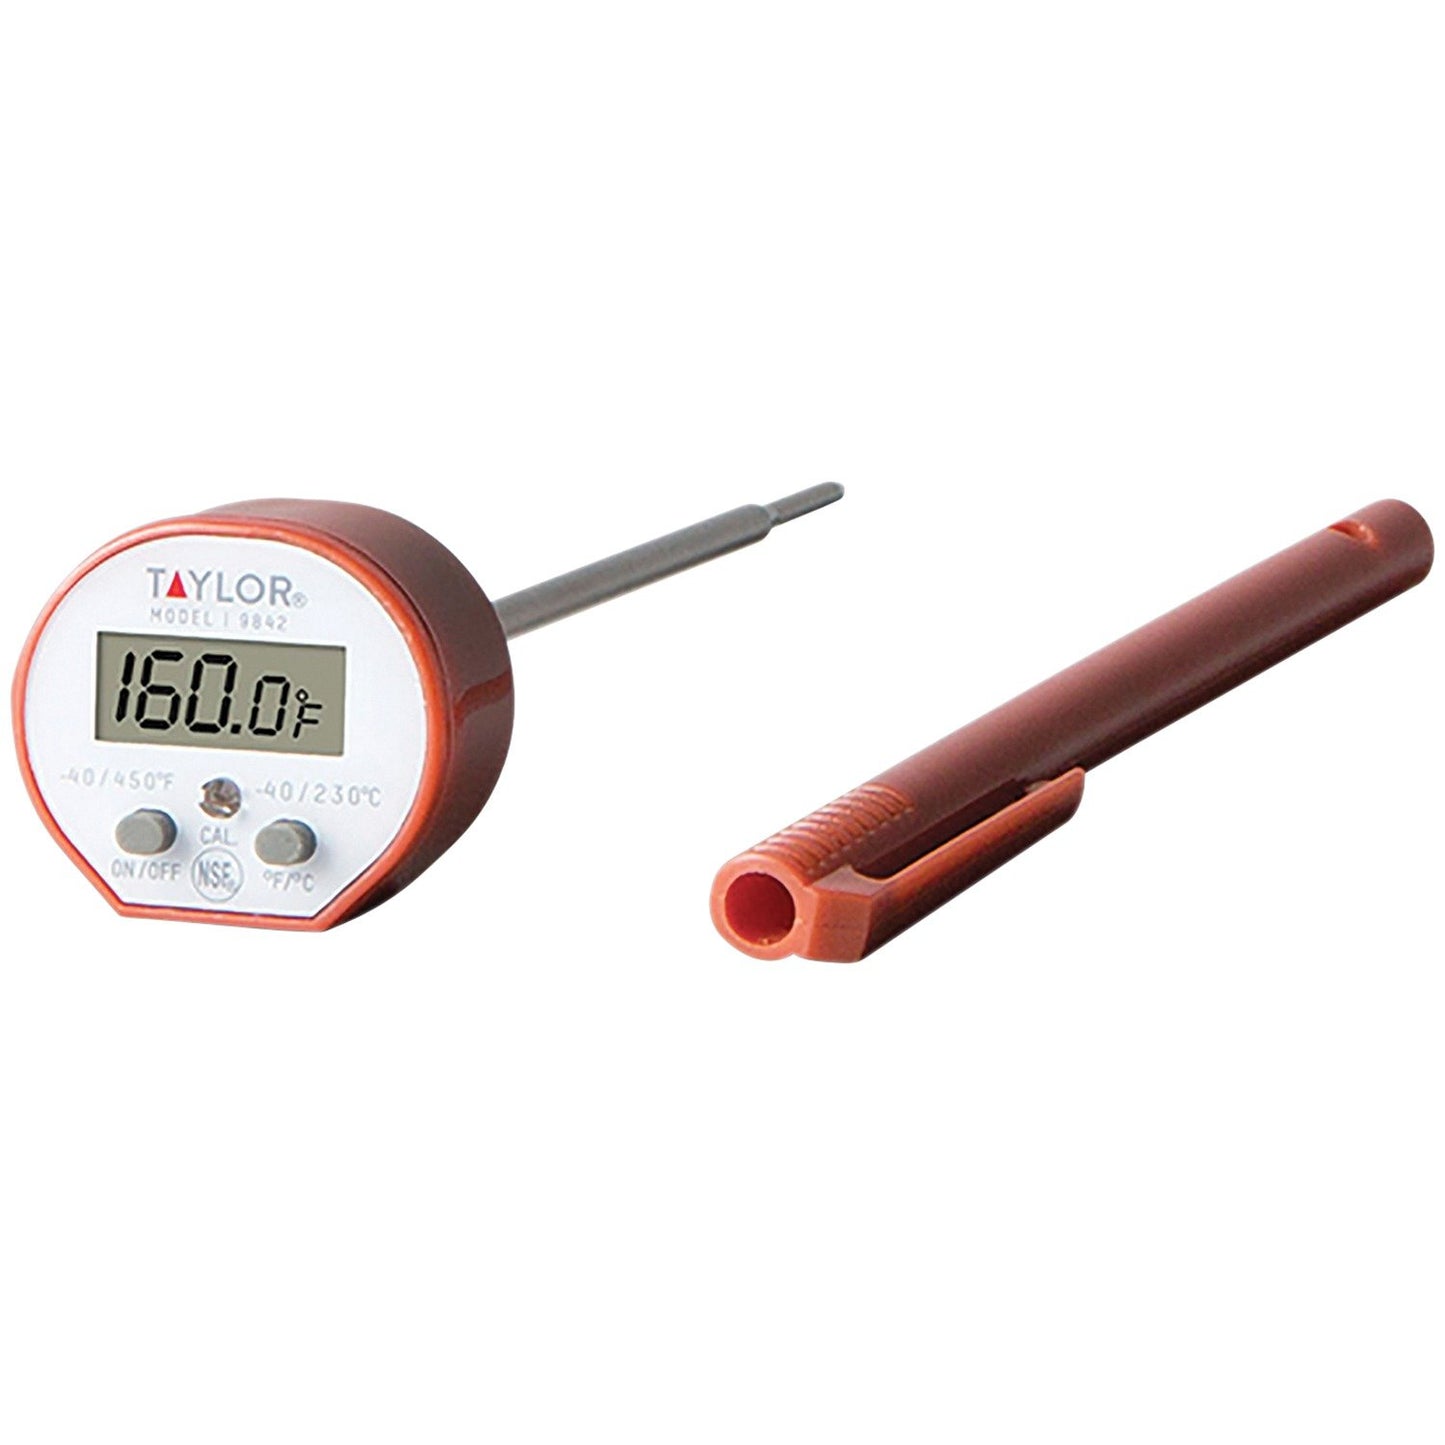 TAYLOR 9842 Digital Instant Thermometer